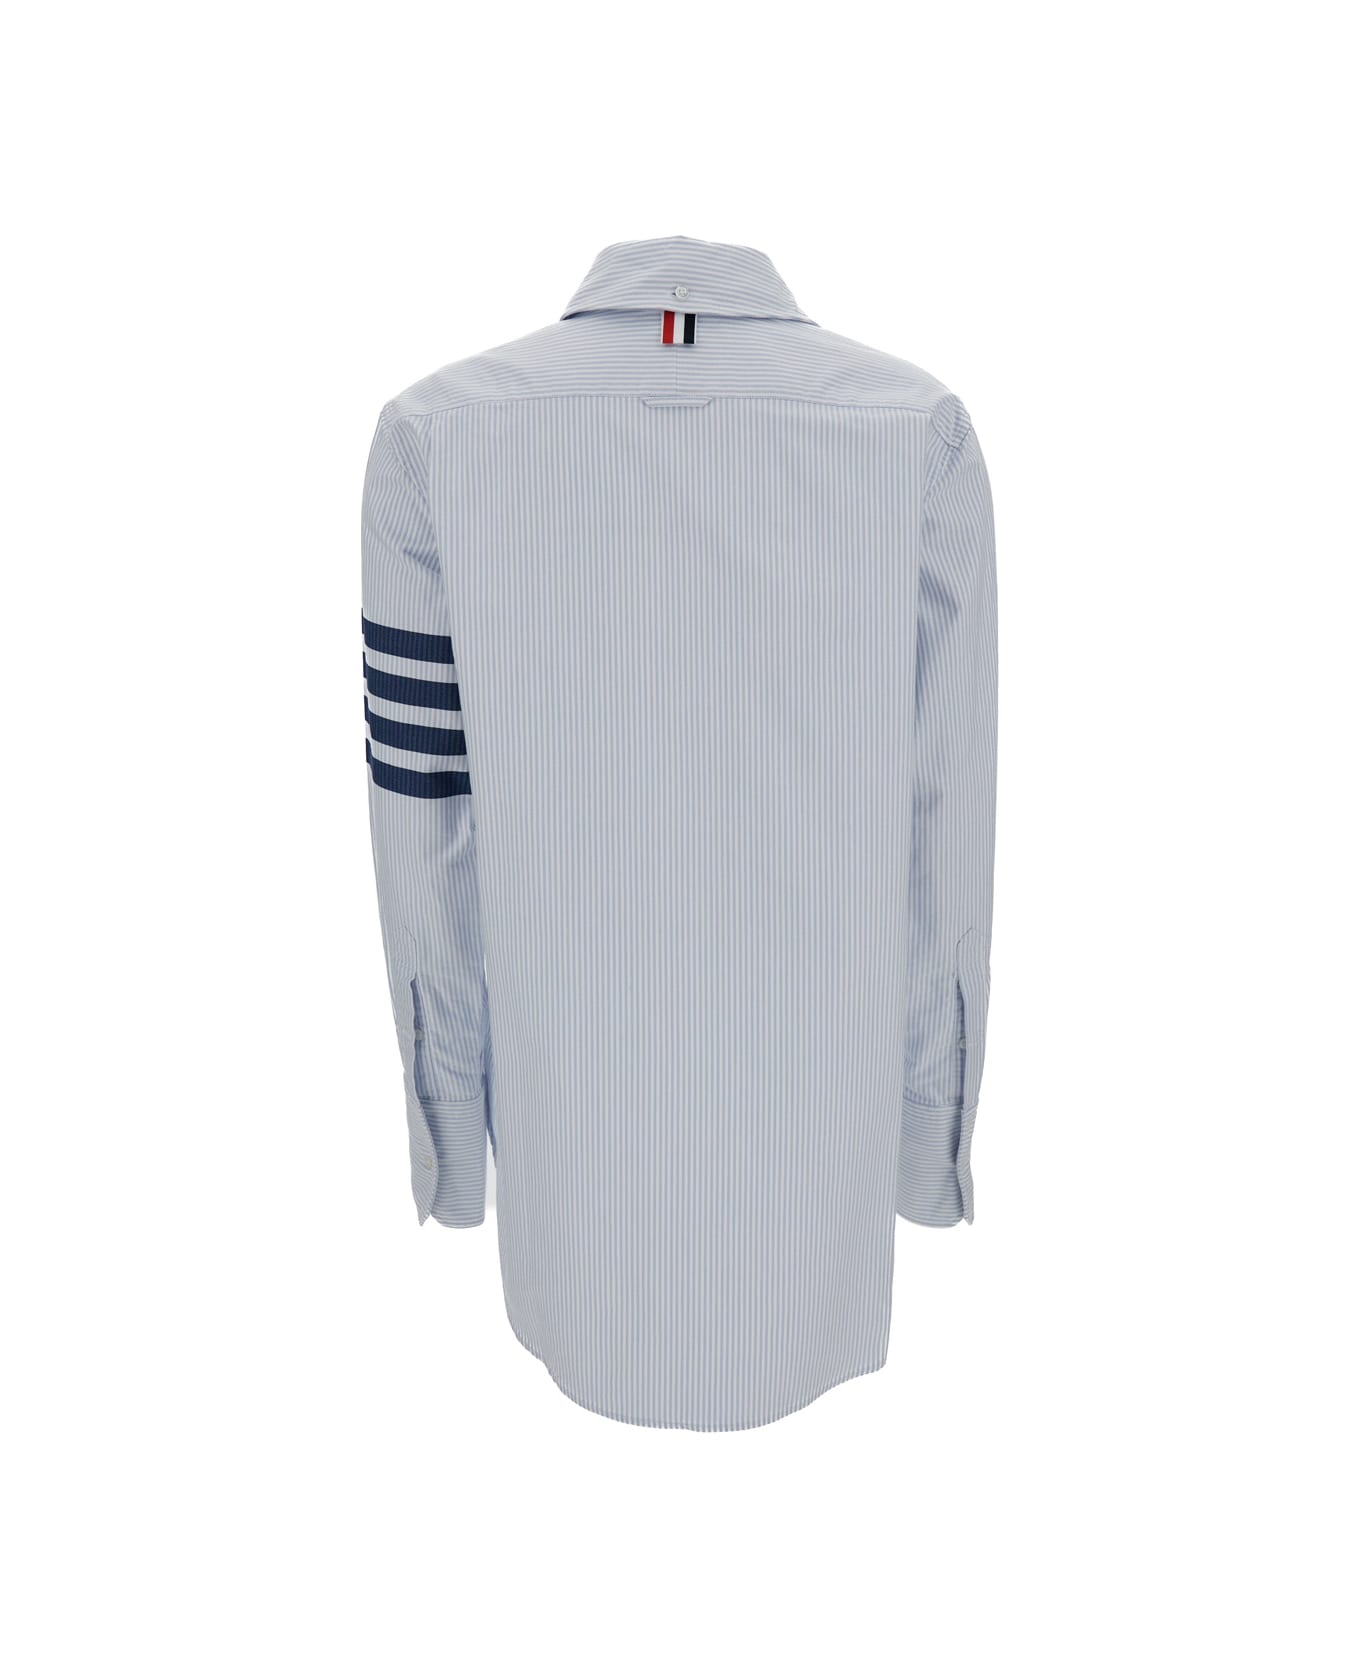 Thom Browne Exaggerated Easy Fit Point Collar Shirt In University Stripe W/ Woven 4 Bar Stripe Oxfordw - Blu